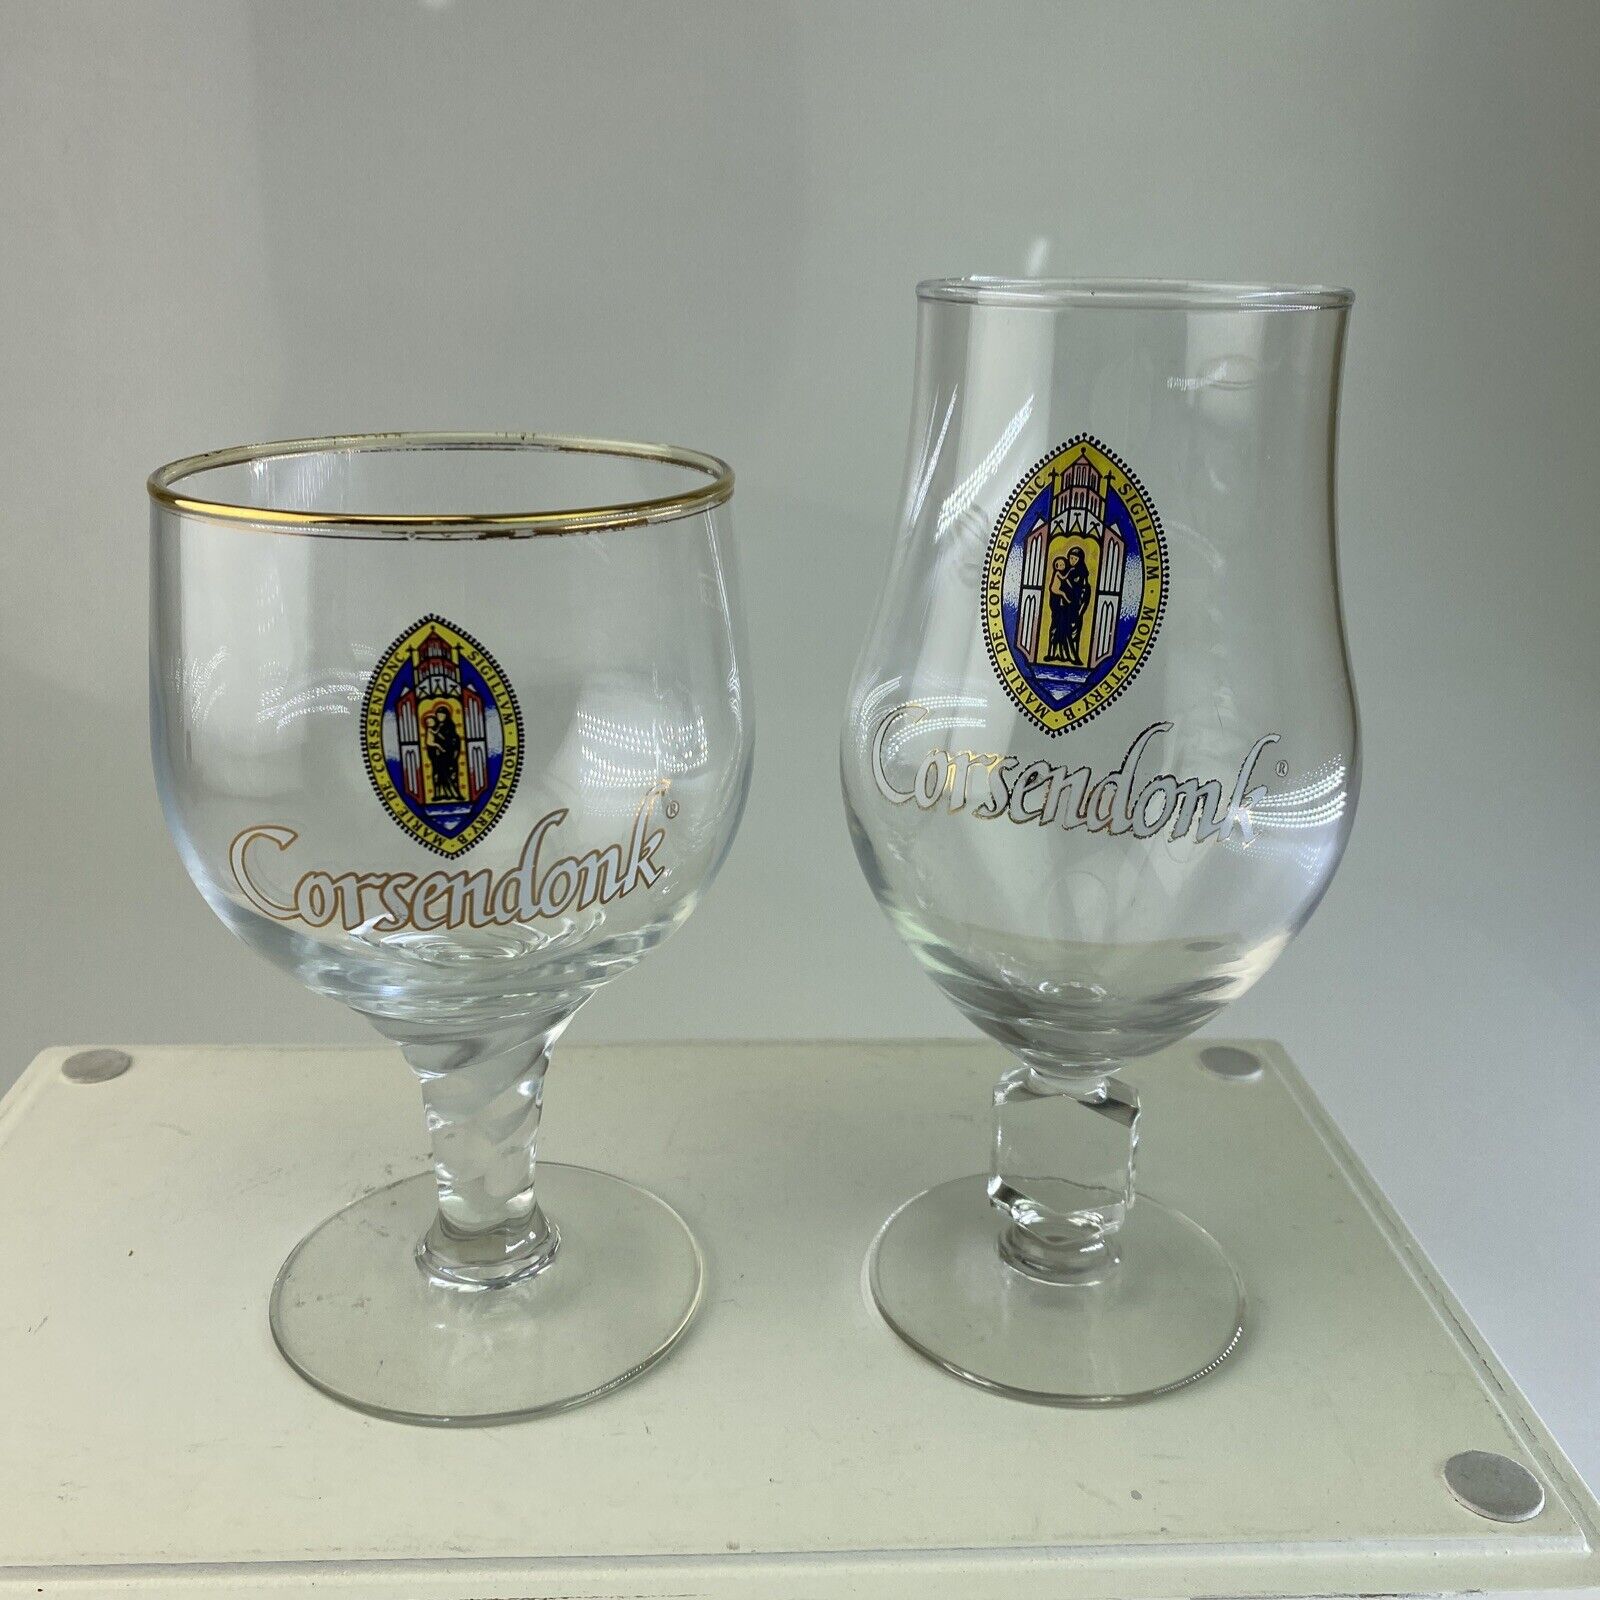 Corsendonk Brewery Goblet Chalice Stemmed Beer Glass .33L - Set of Two